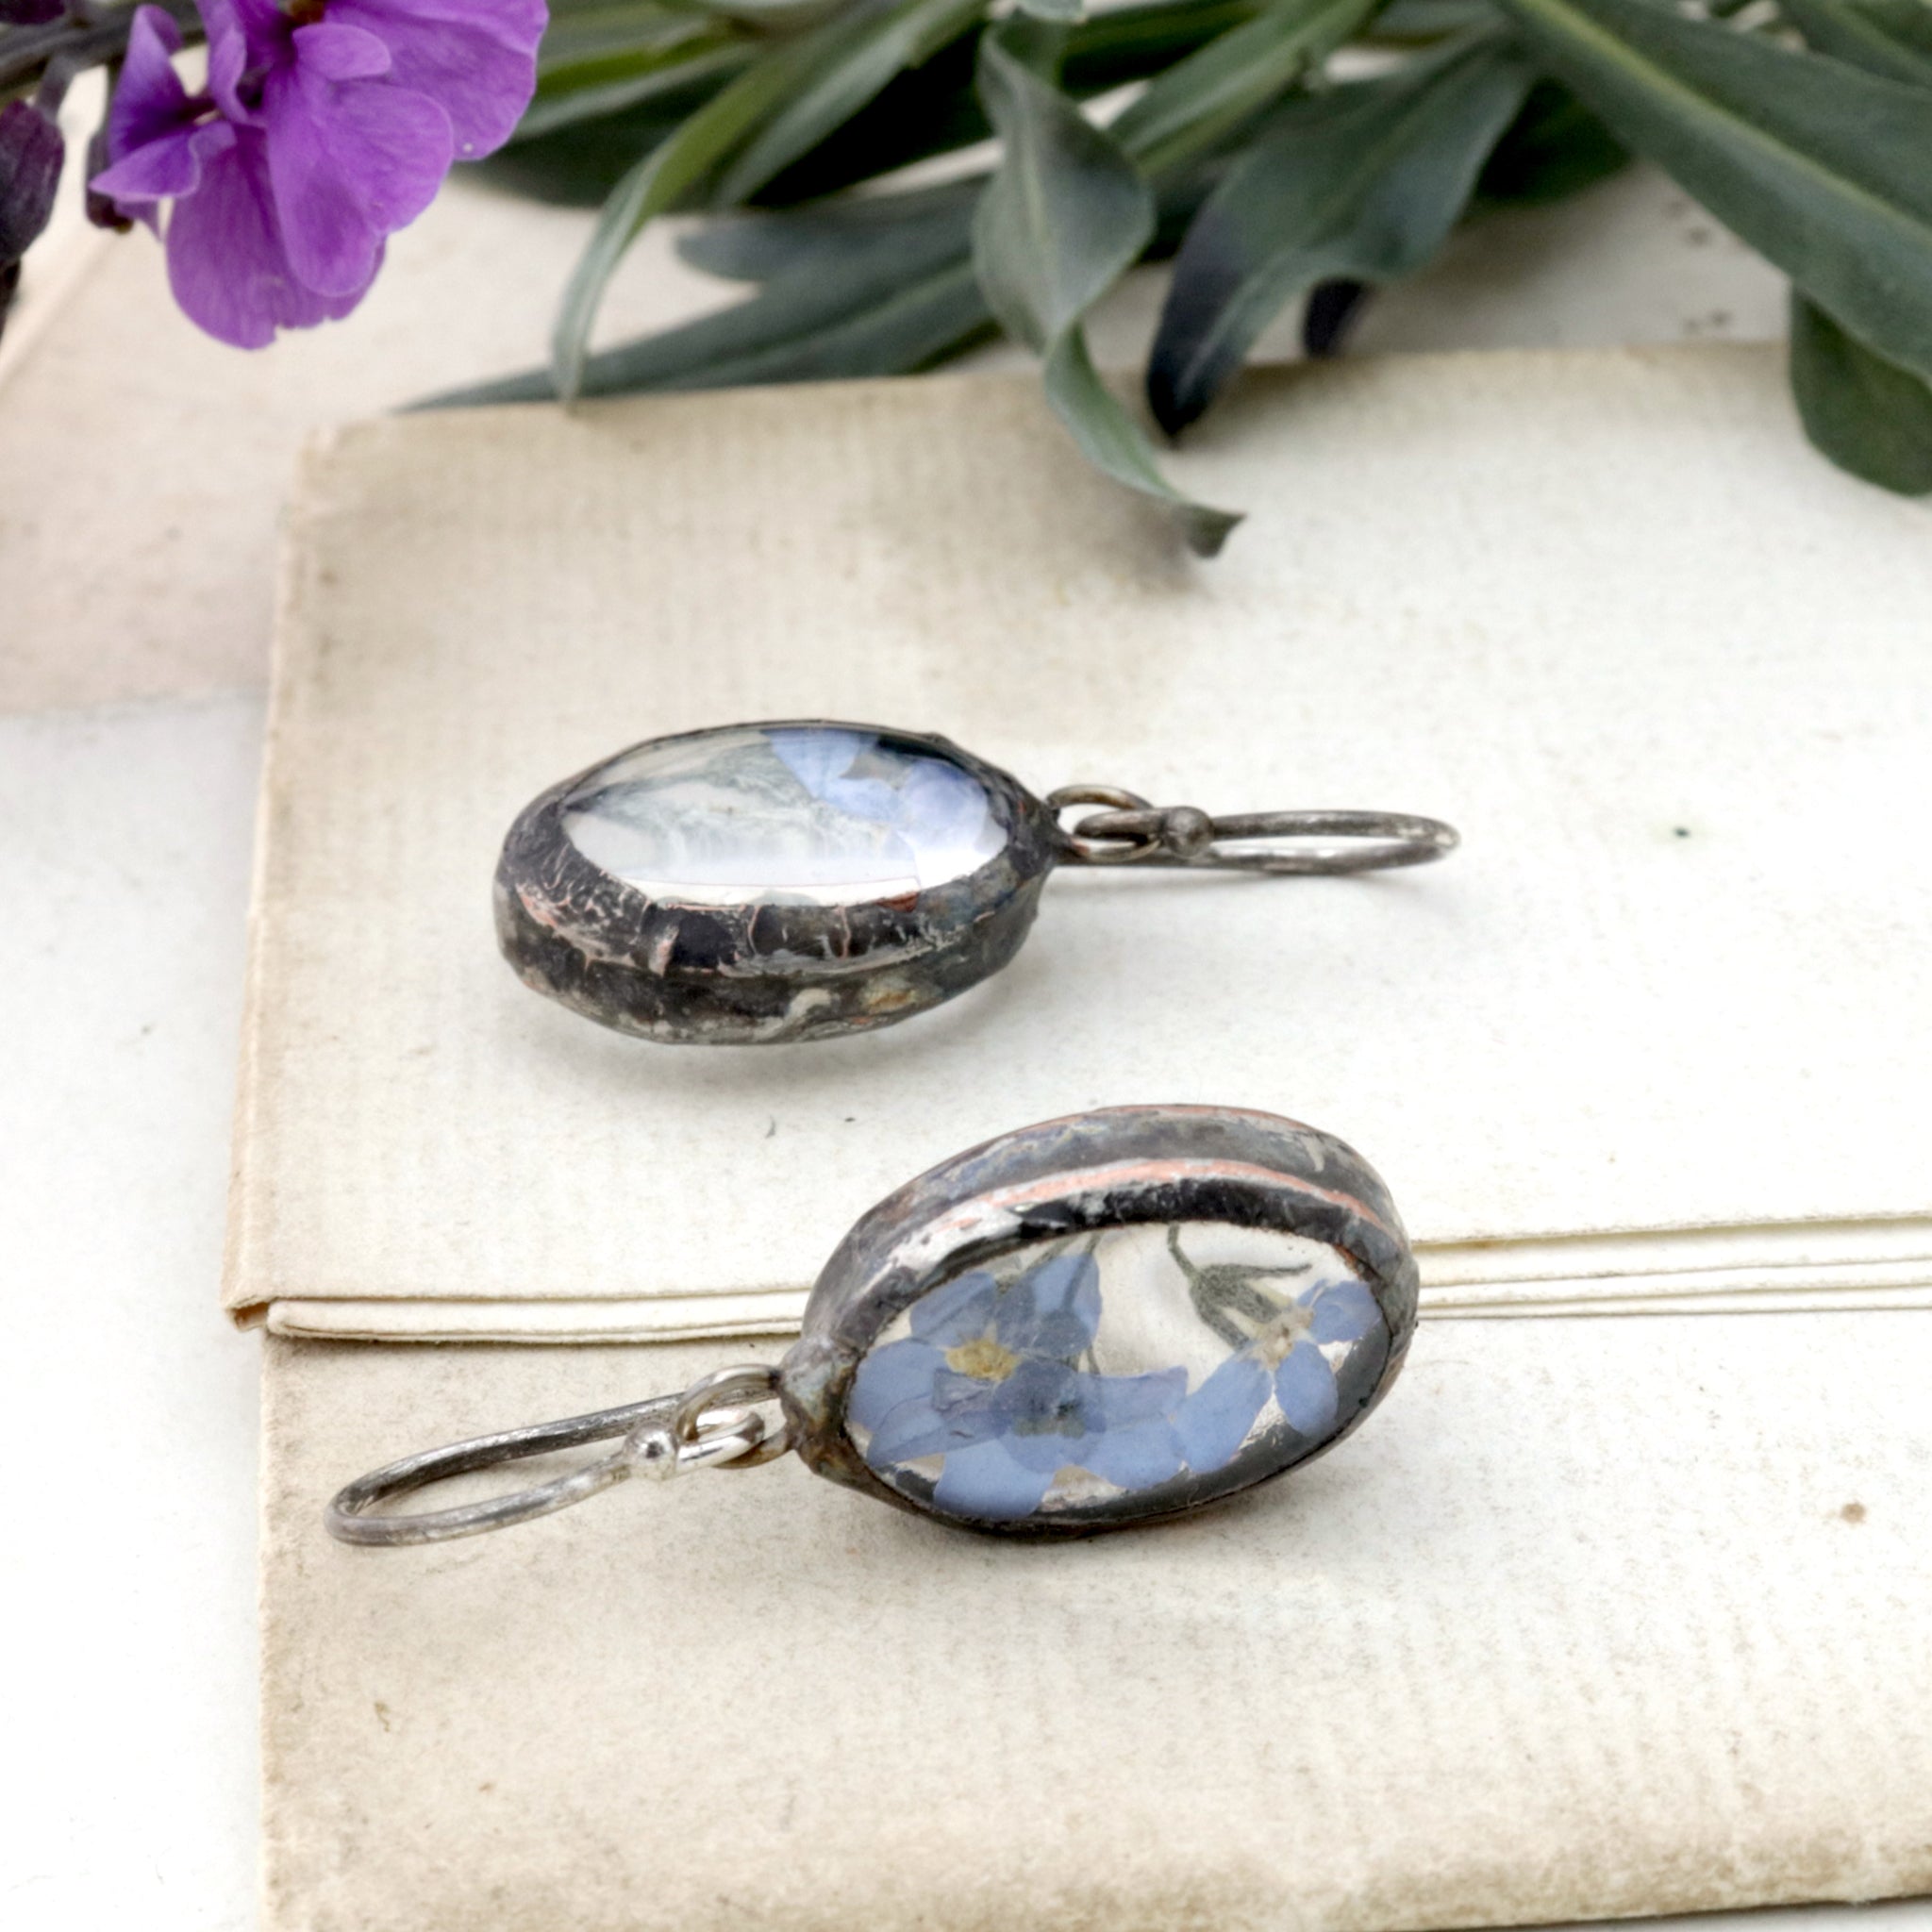 Oval forget-me-not earrings lying on an old letter